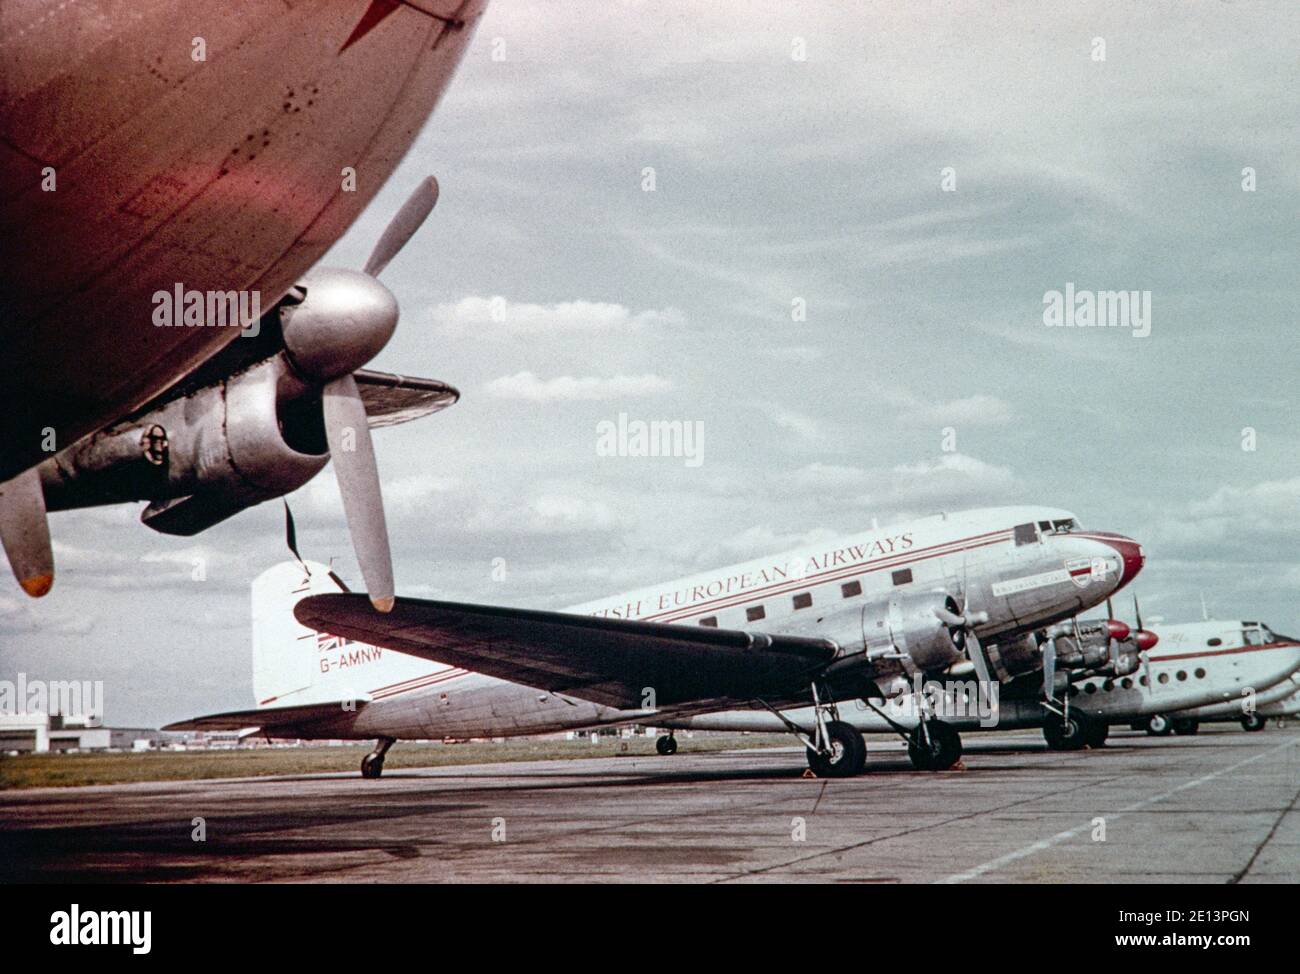 A vintage late 1950s colour photograph a British European Airways, BEA, Douglas DC-3, registration G-AMNW, parked at London Heathrow airport in England. A Dan Air Avro York can be seen behind it. Stock Photo